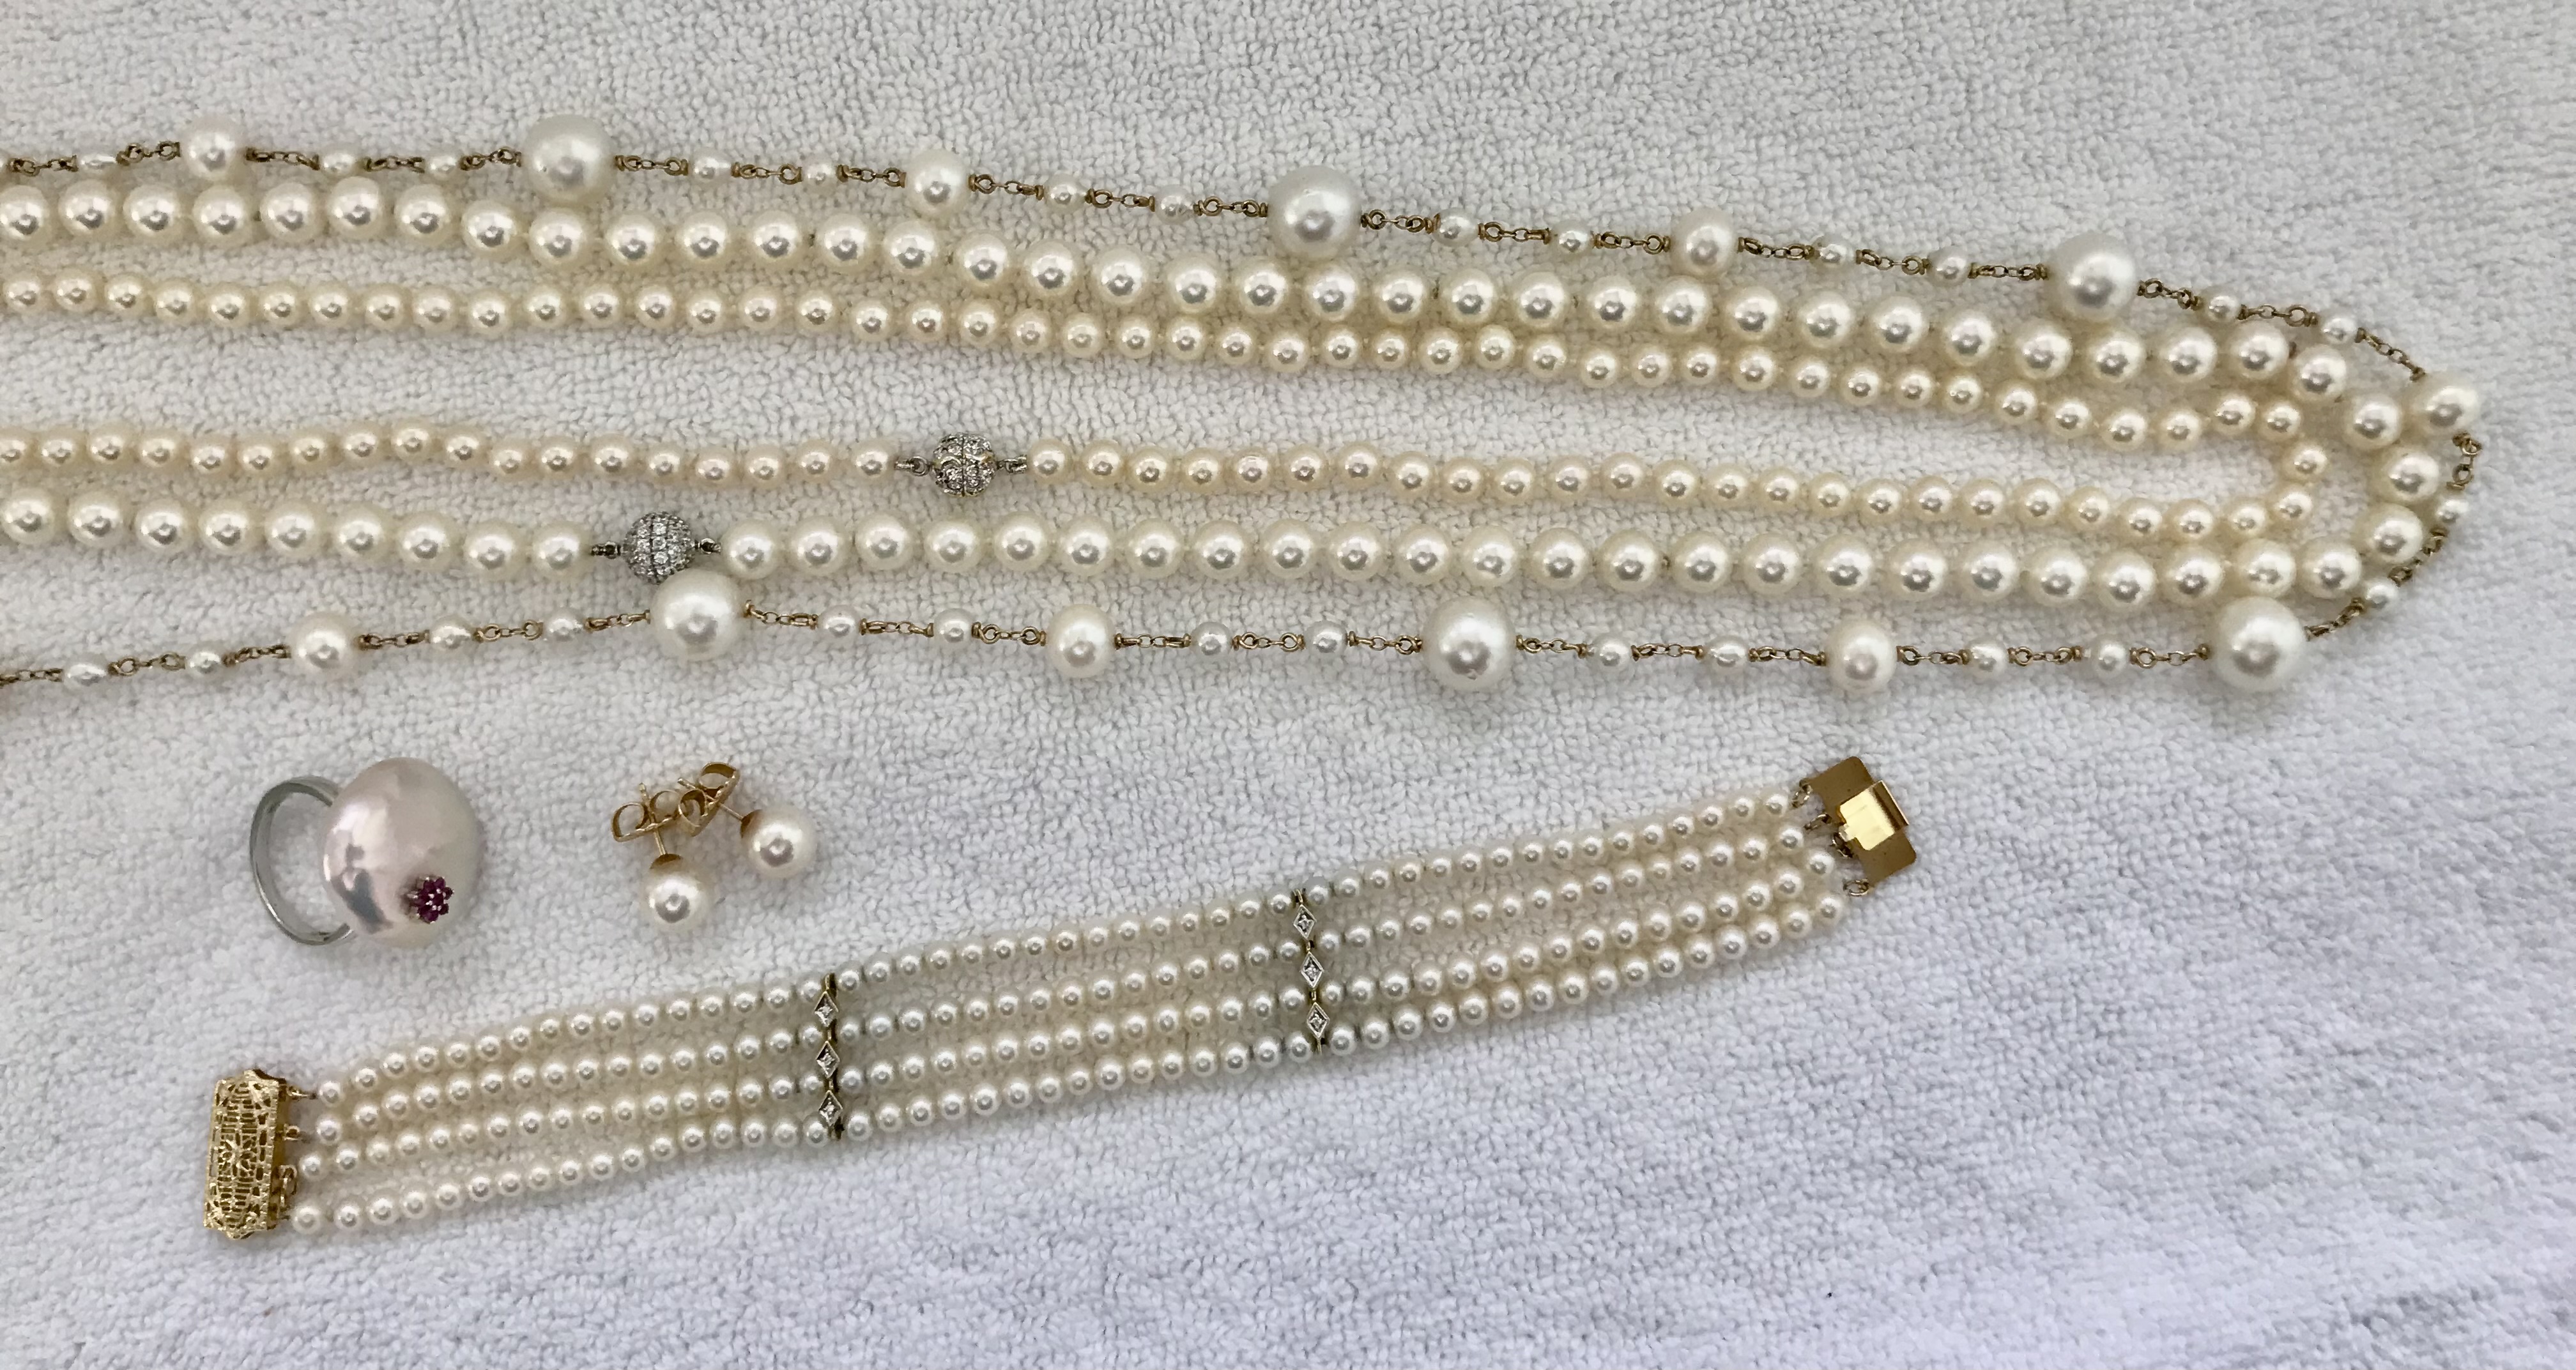 All the pearls together laid out